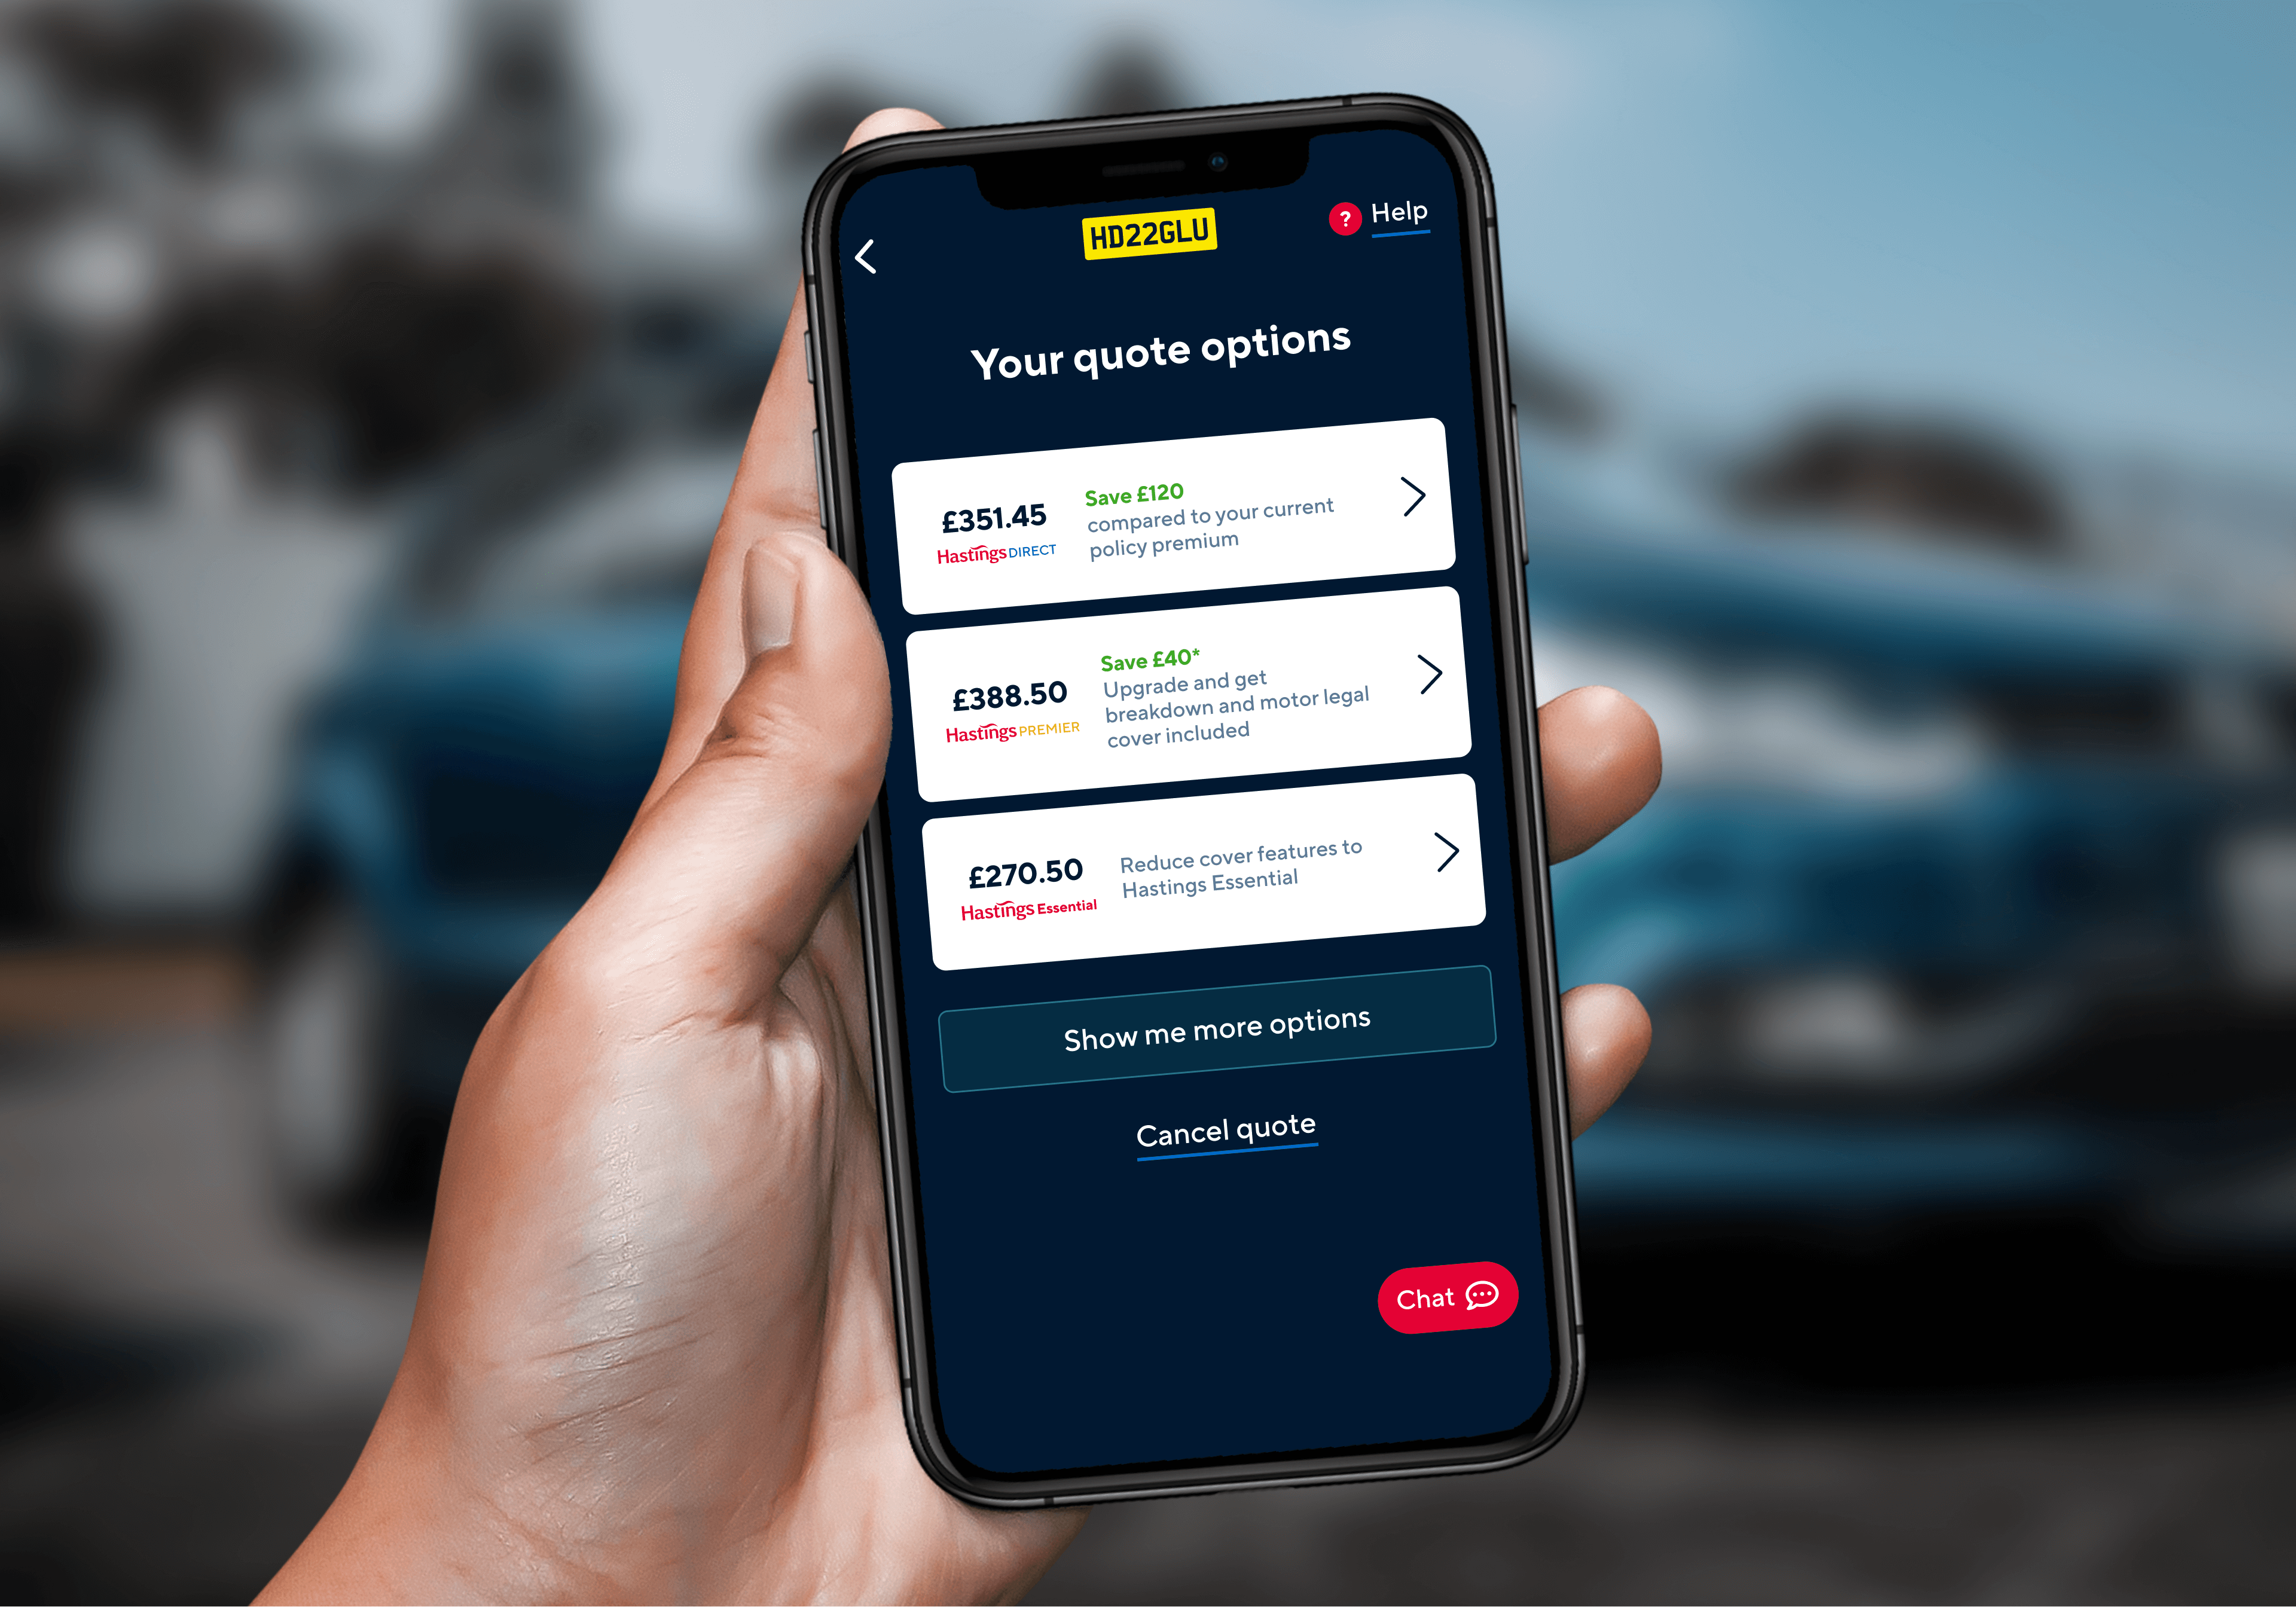 An image showing a hand holding a mobile phone in front of a car. On the screen is three different insurance quote options for three different Hastings direct policies.